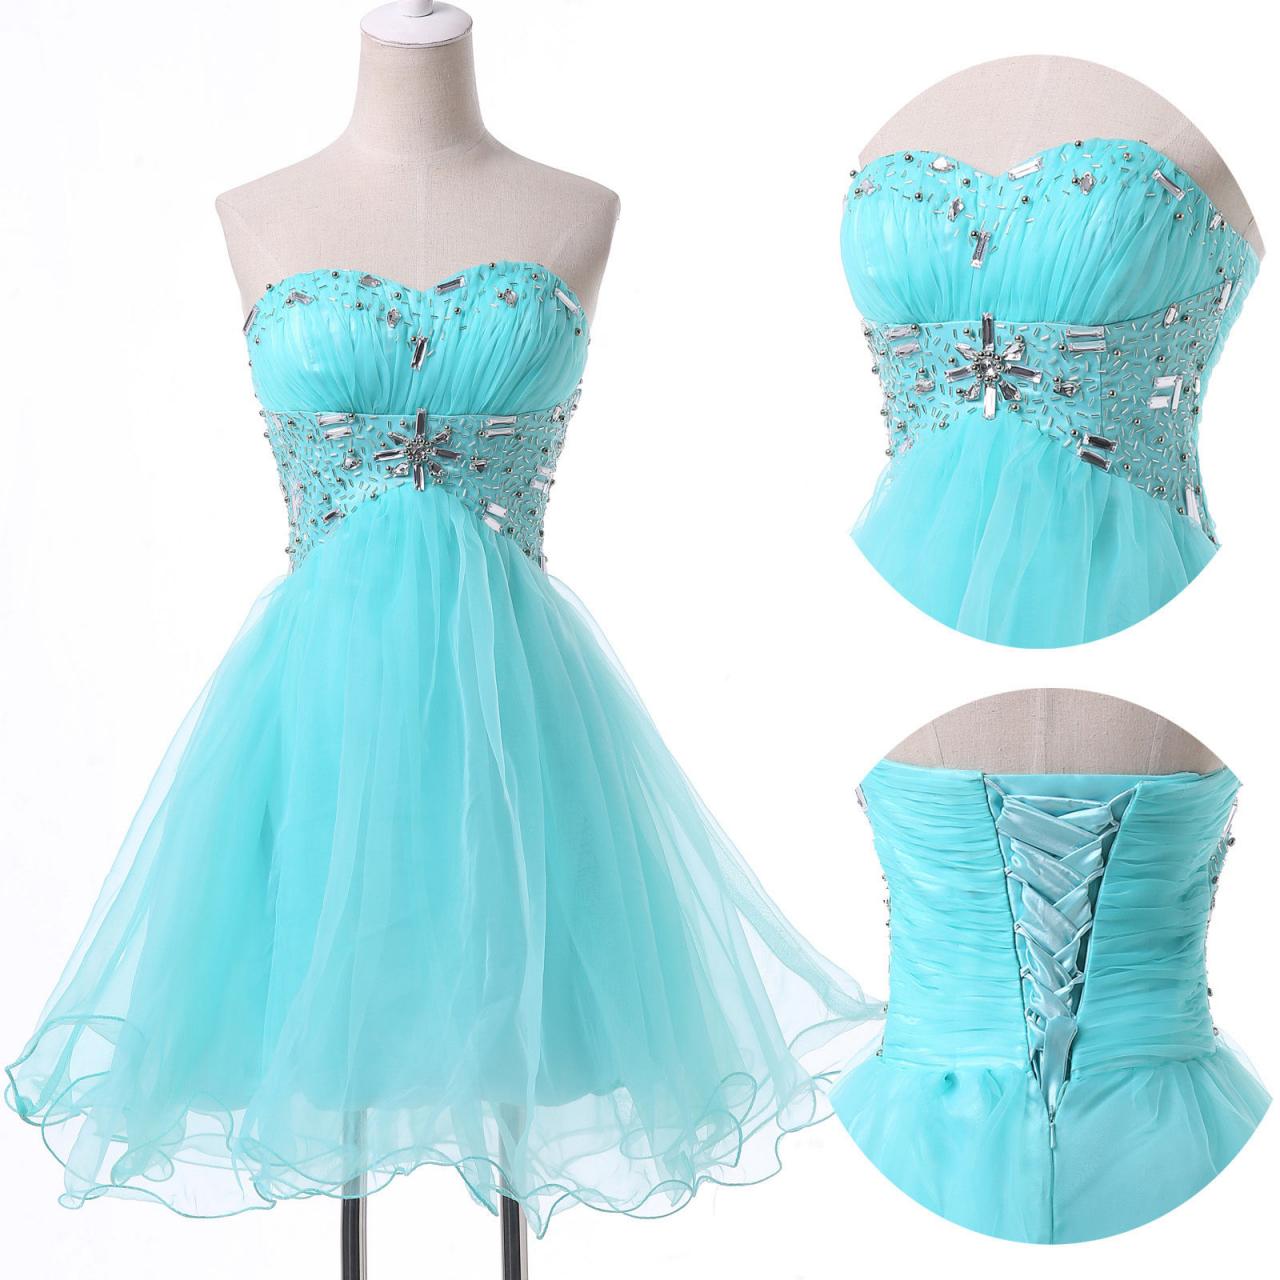 Crystal Embellished Ruched Sweetheart Short Tulle Homecoming Dress Featuring Lace-up Back